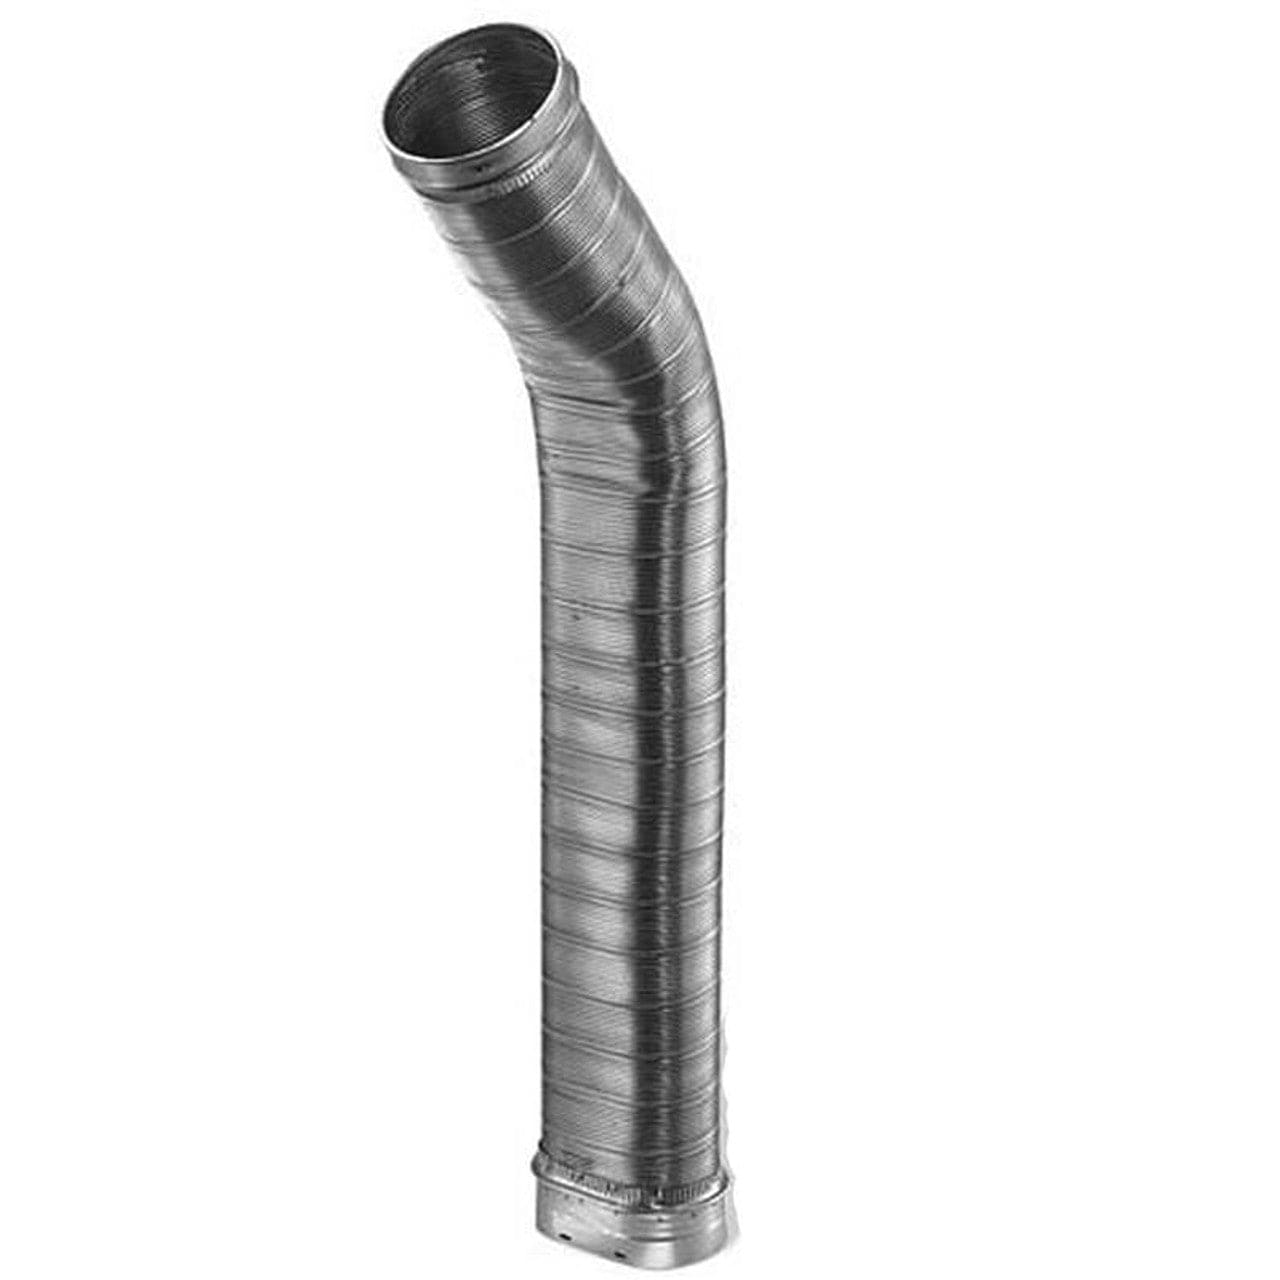 8" X 60" DuraLiner Stainless Steel Oval-To-Round Flex Pipe - 8DLR-60ORF - Chimney Cricket